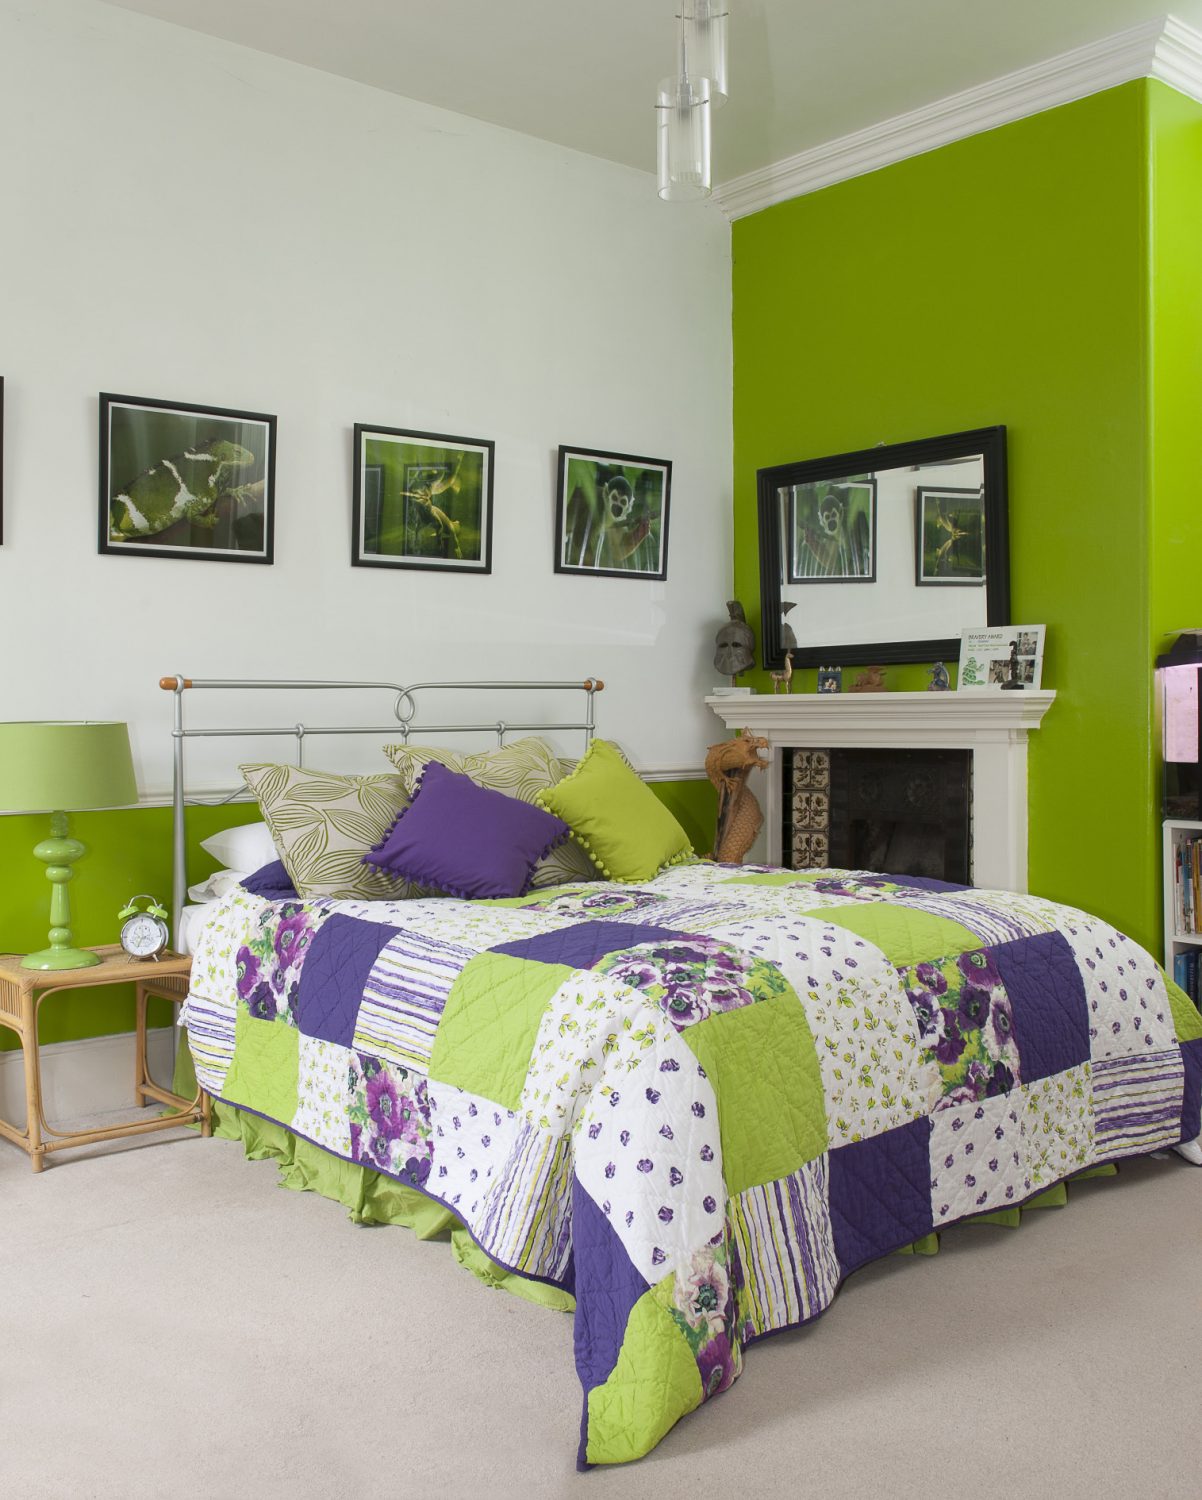 The lime green walls in Dawn’s eldest son’s room are perfectly complemented with a purple Ragged Rose patchwork quilt and pom-pom edged cushions